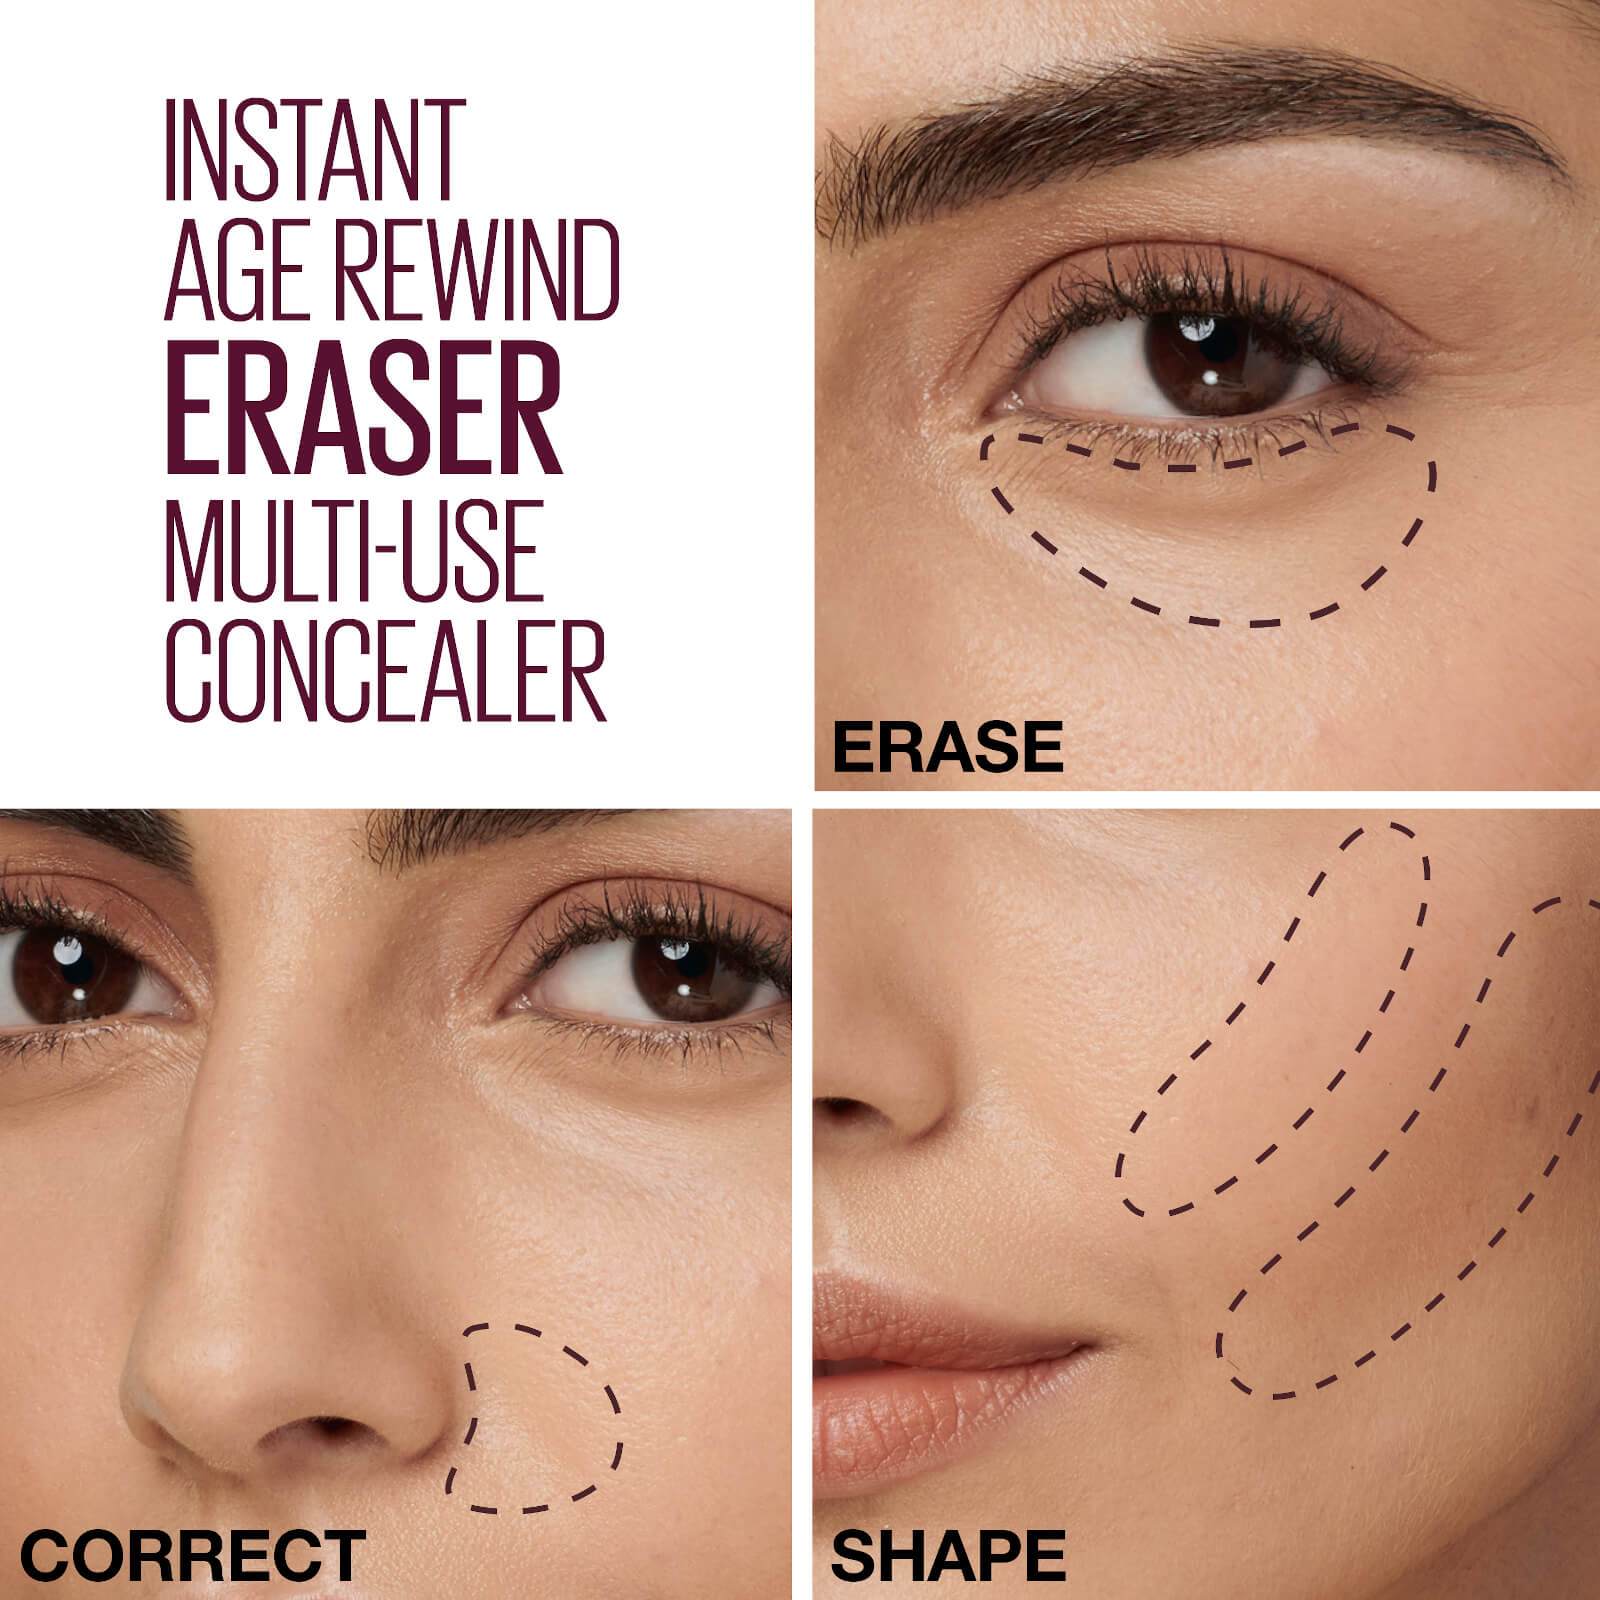 Instant Anti Age Eraser Multi-Use Concealer - Give Us Beauty